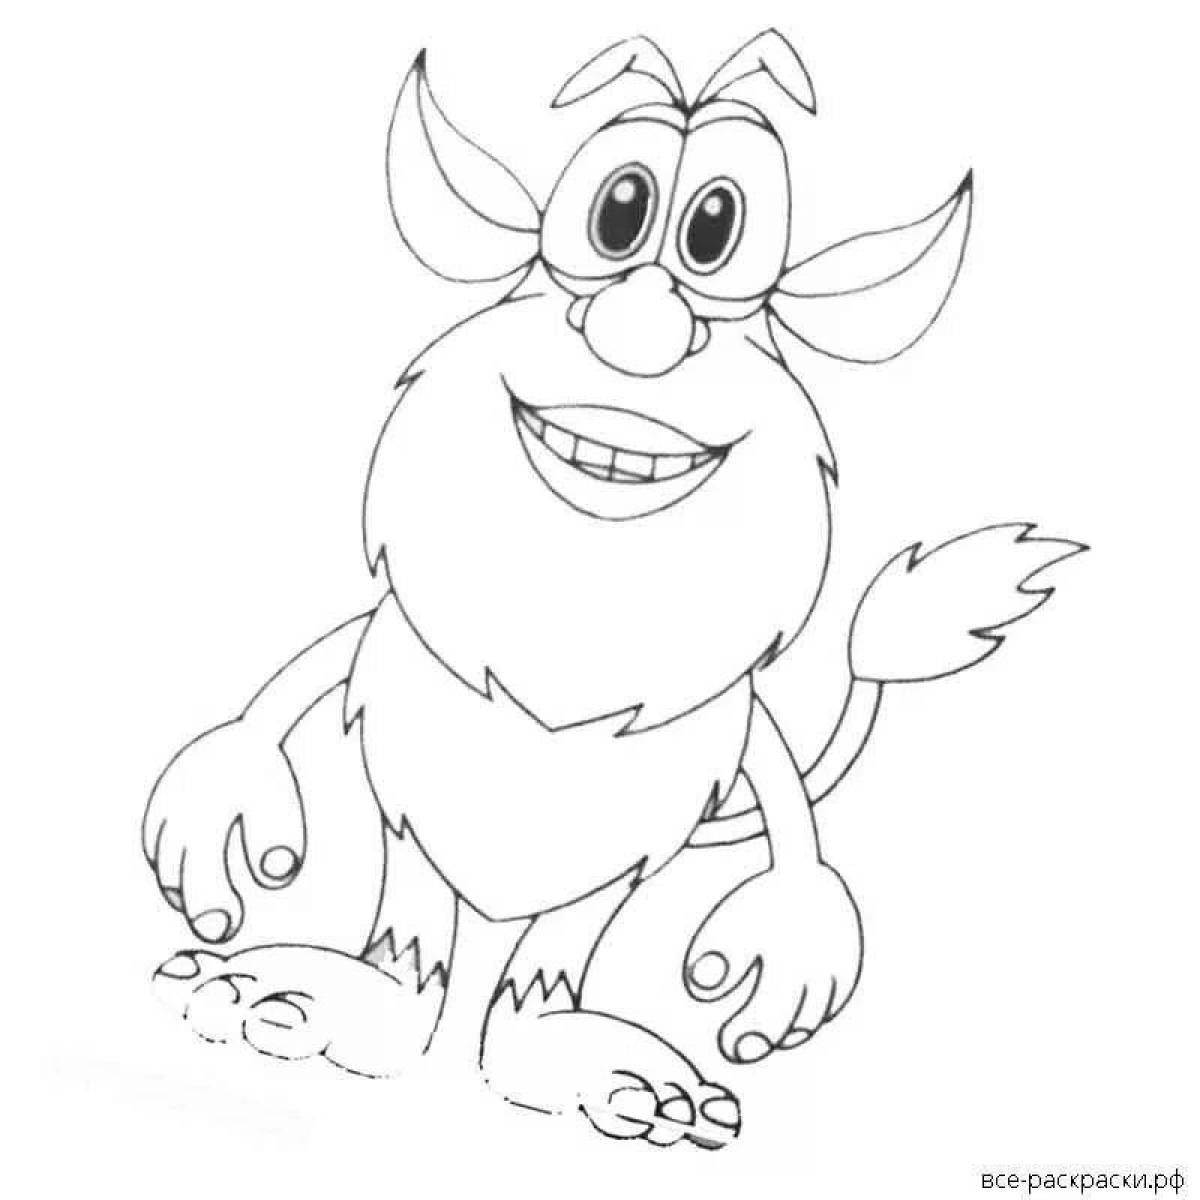 Great date brownie coloring page